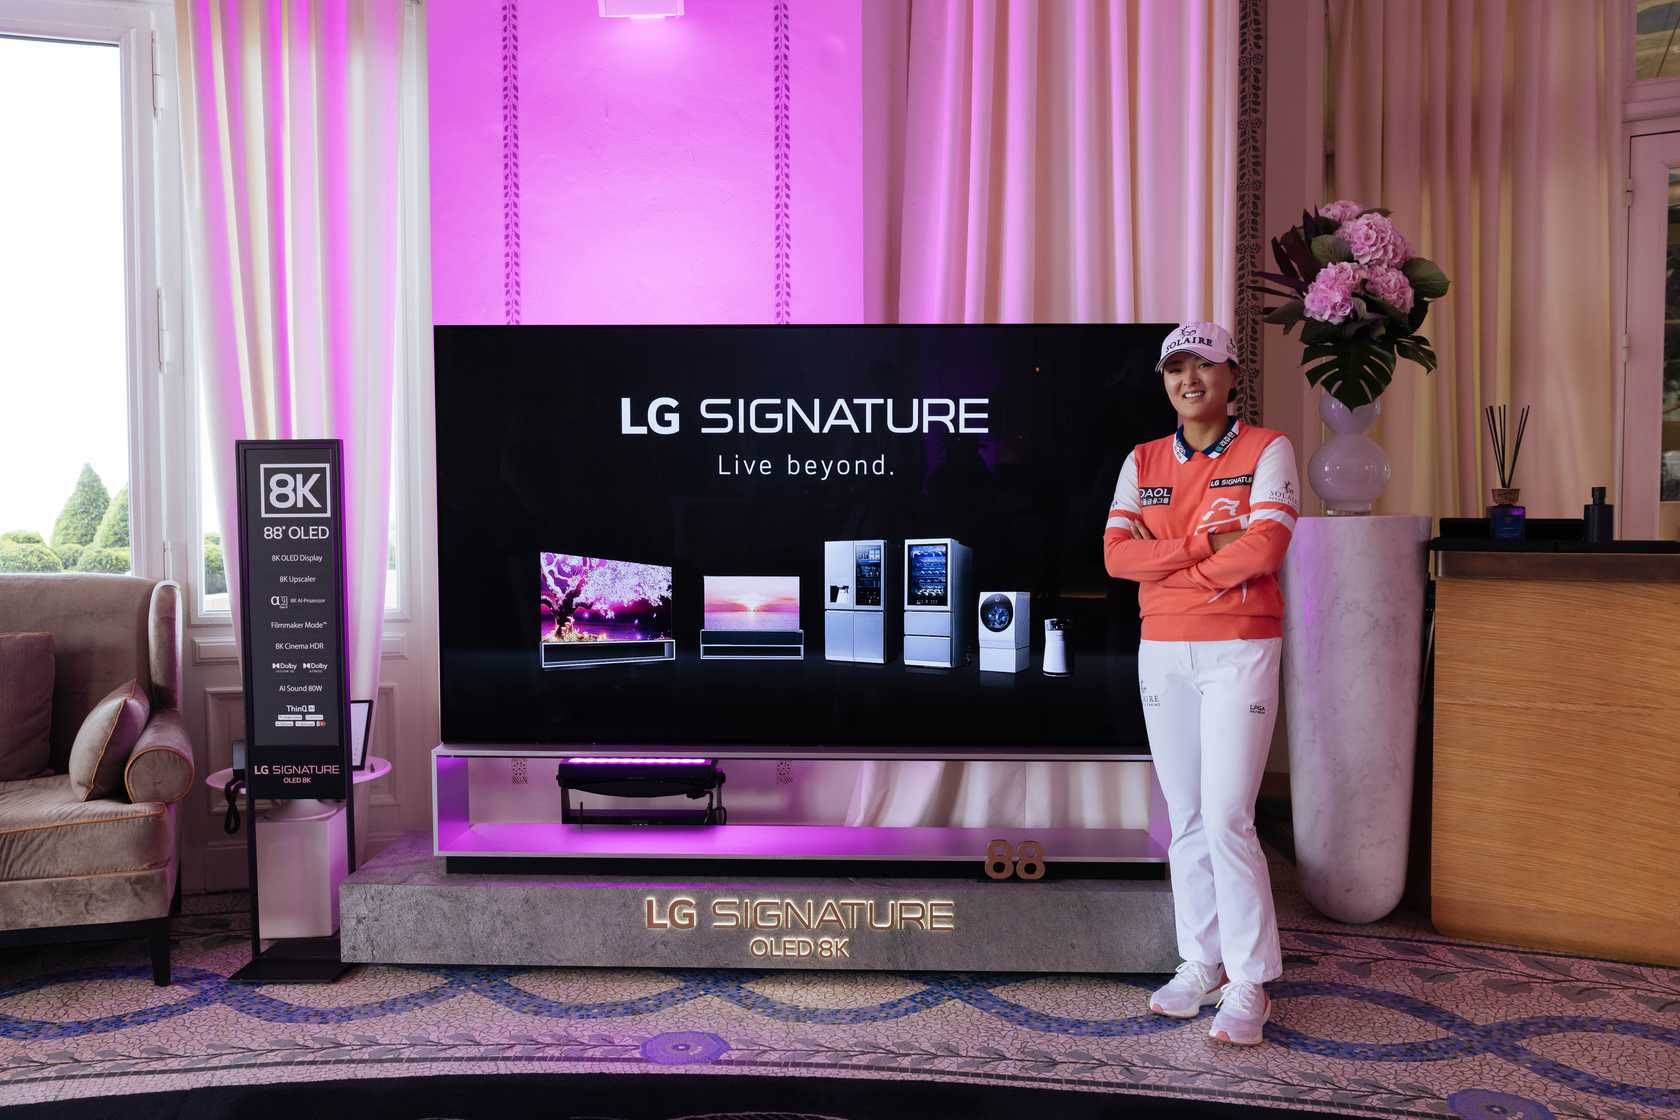 Golfer Ko Jin-young posing in front of LG SIGNATURE OLED TV